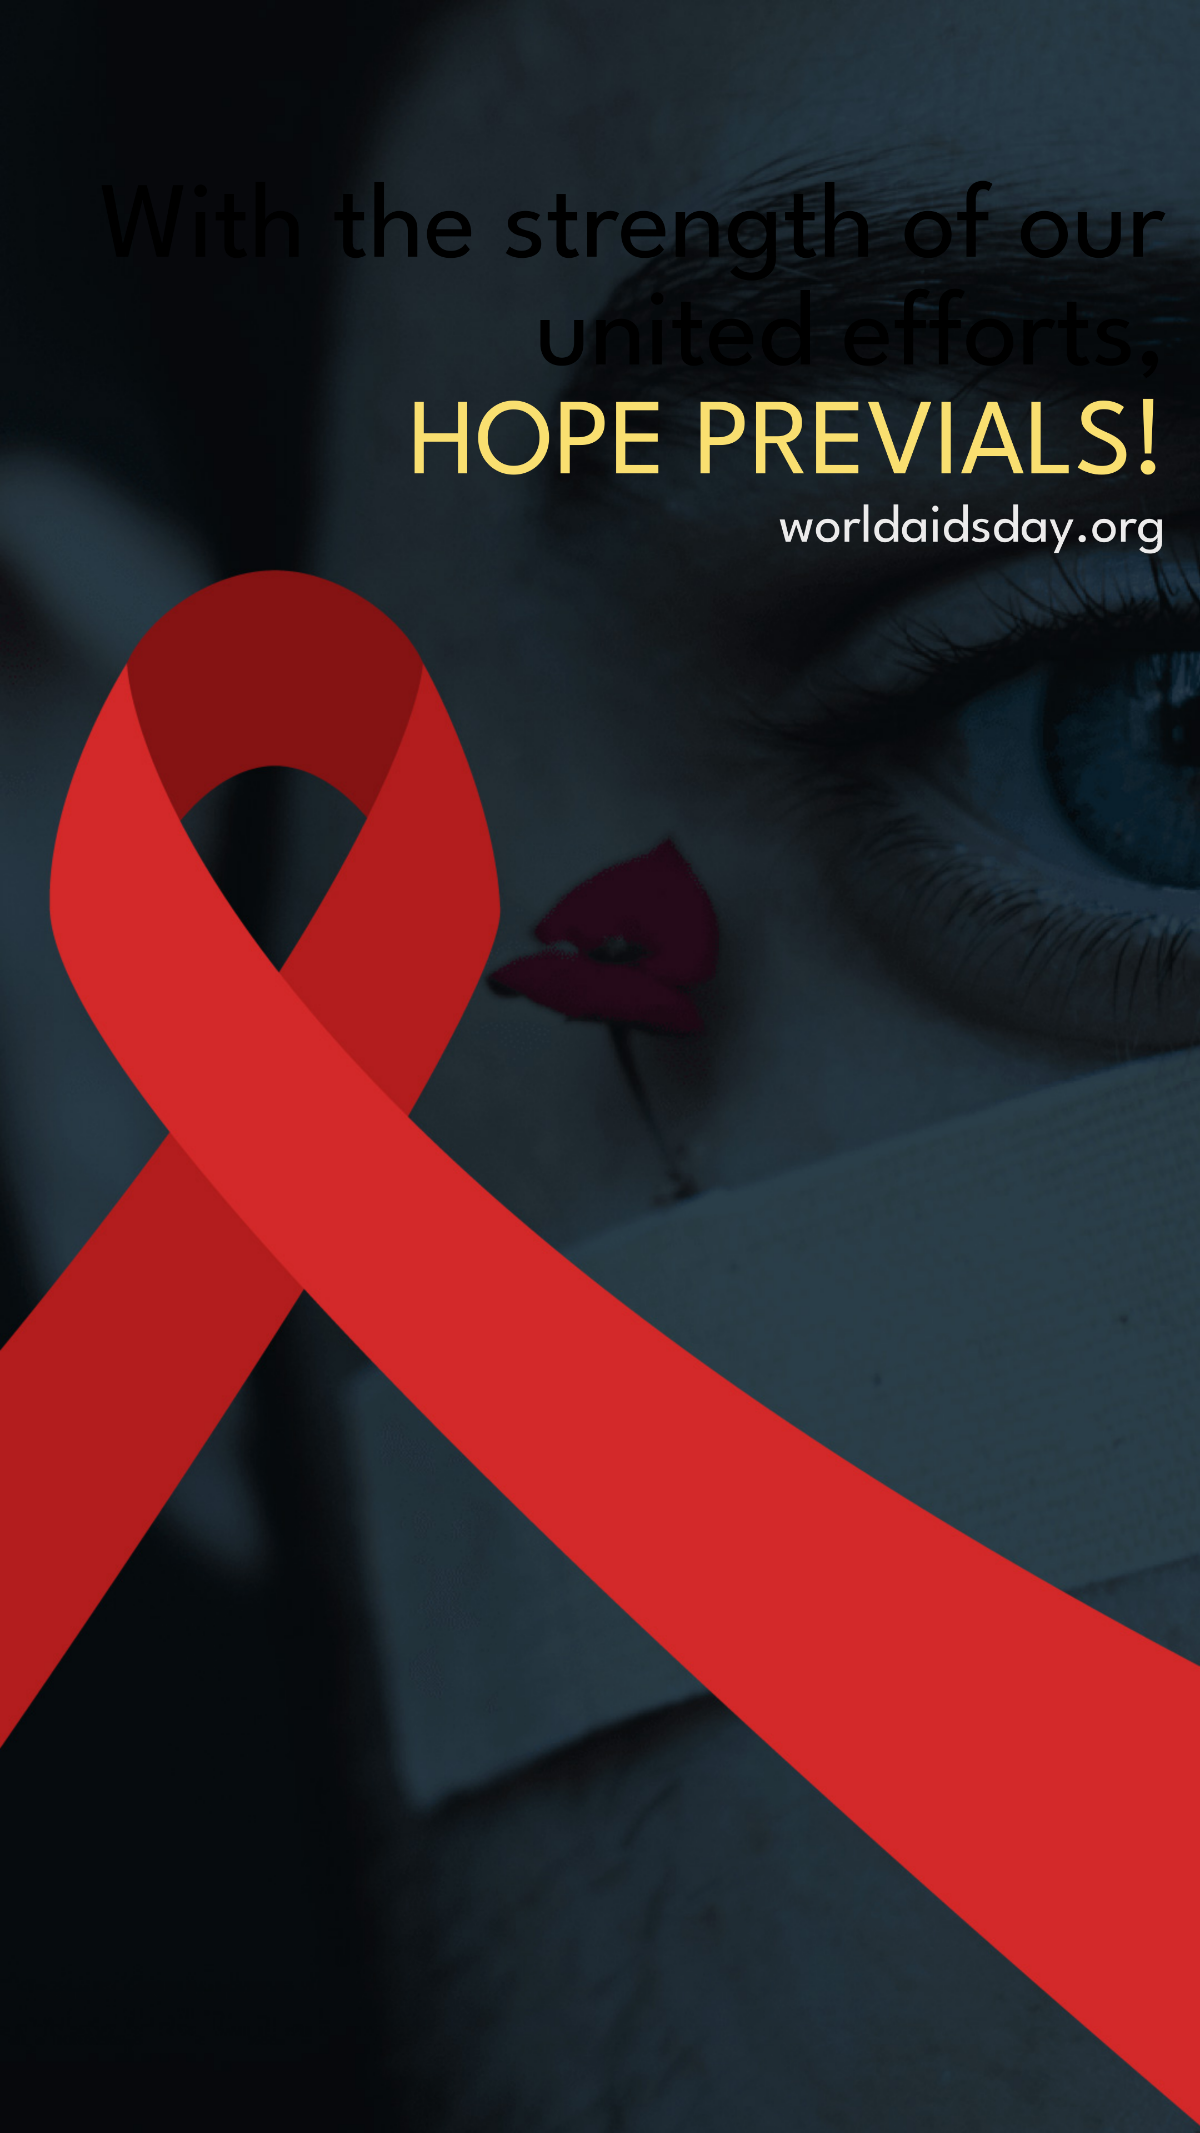 Positive World AIDs Day Quote